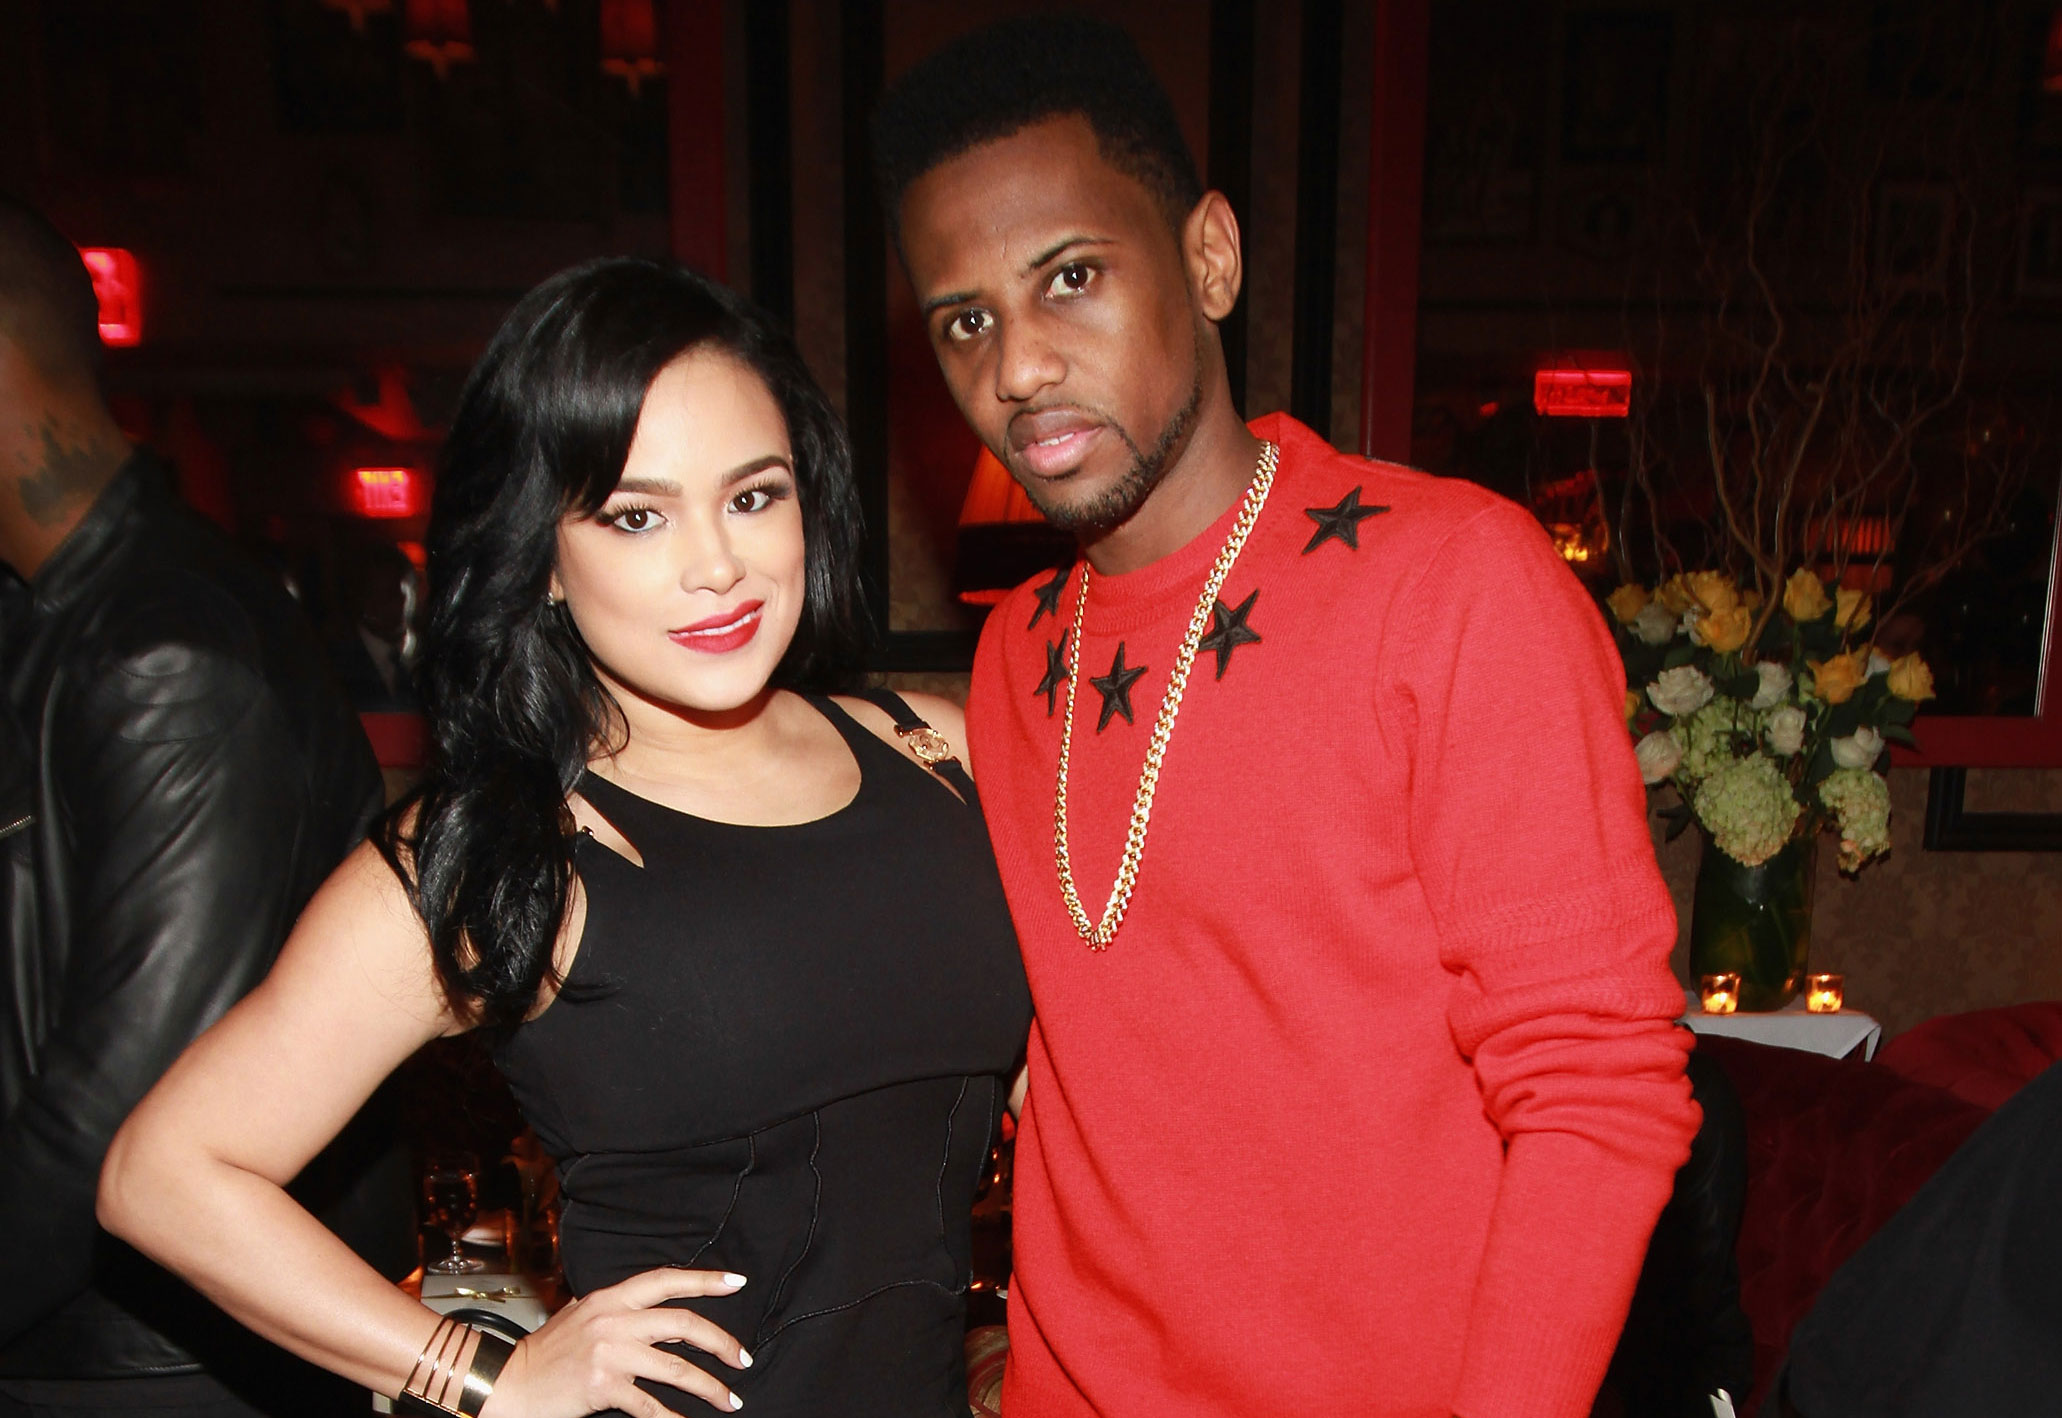 Fabolous & Emily B. Spotted At Coachella Together Despite Ongoing